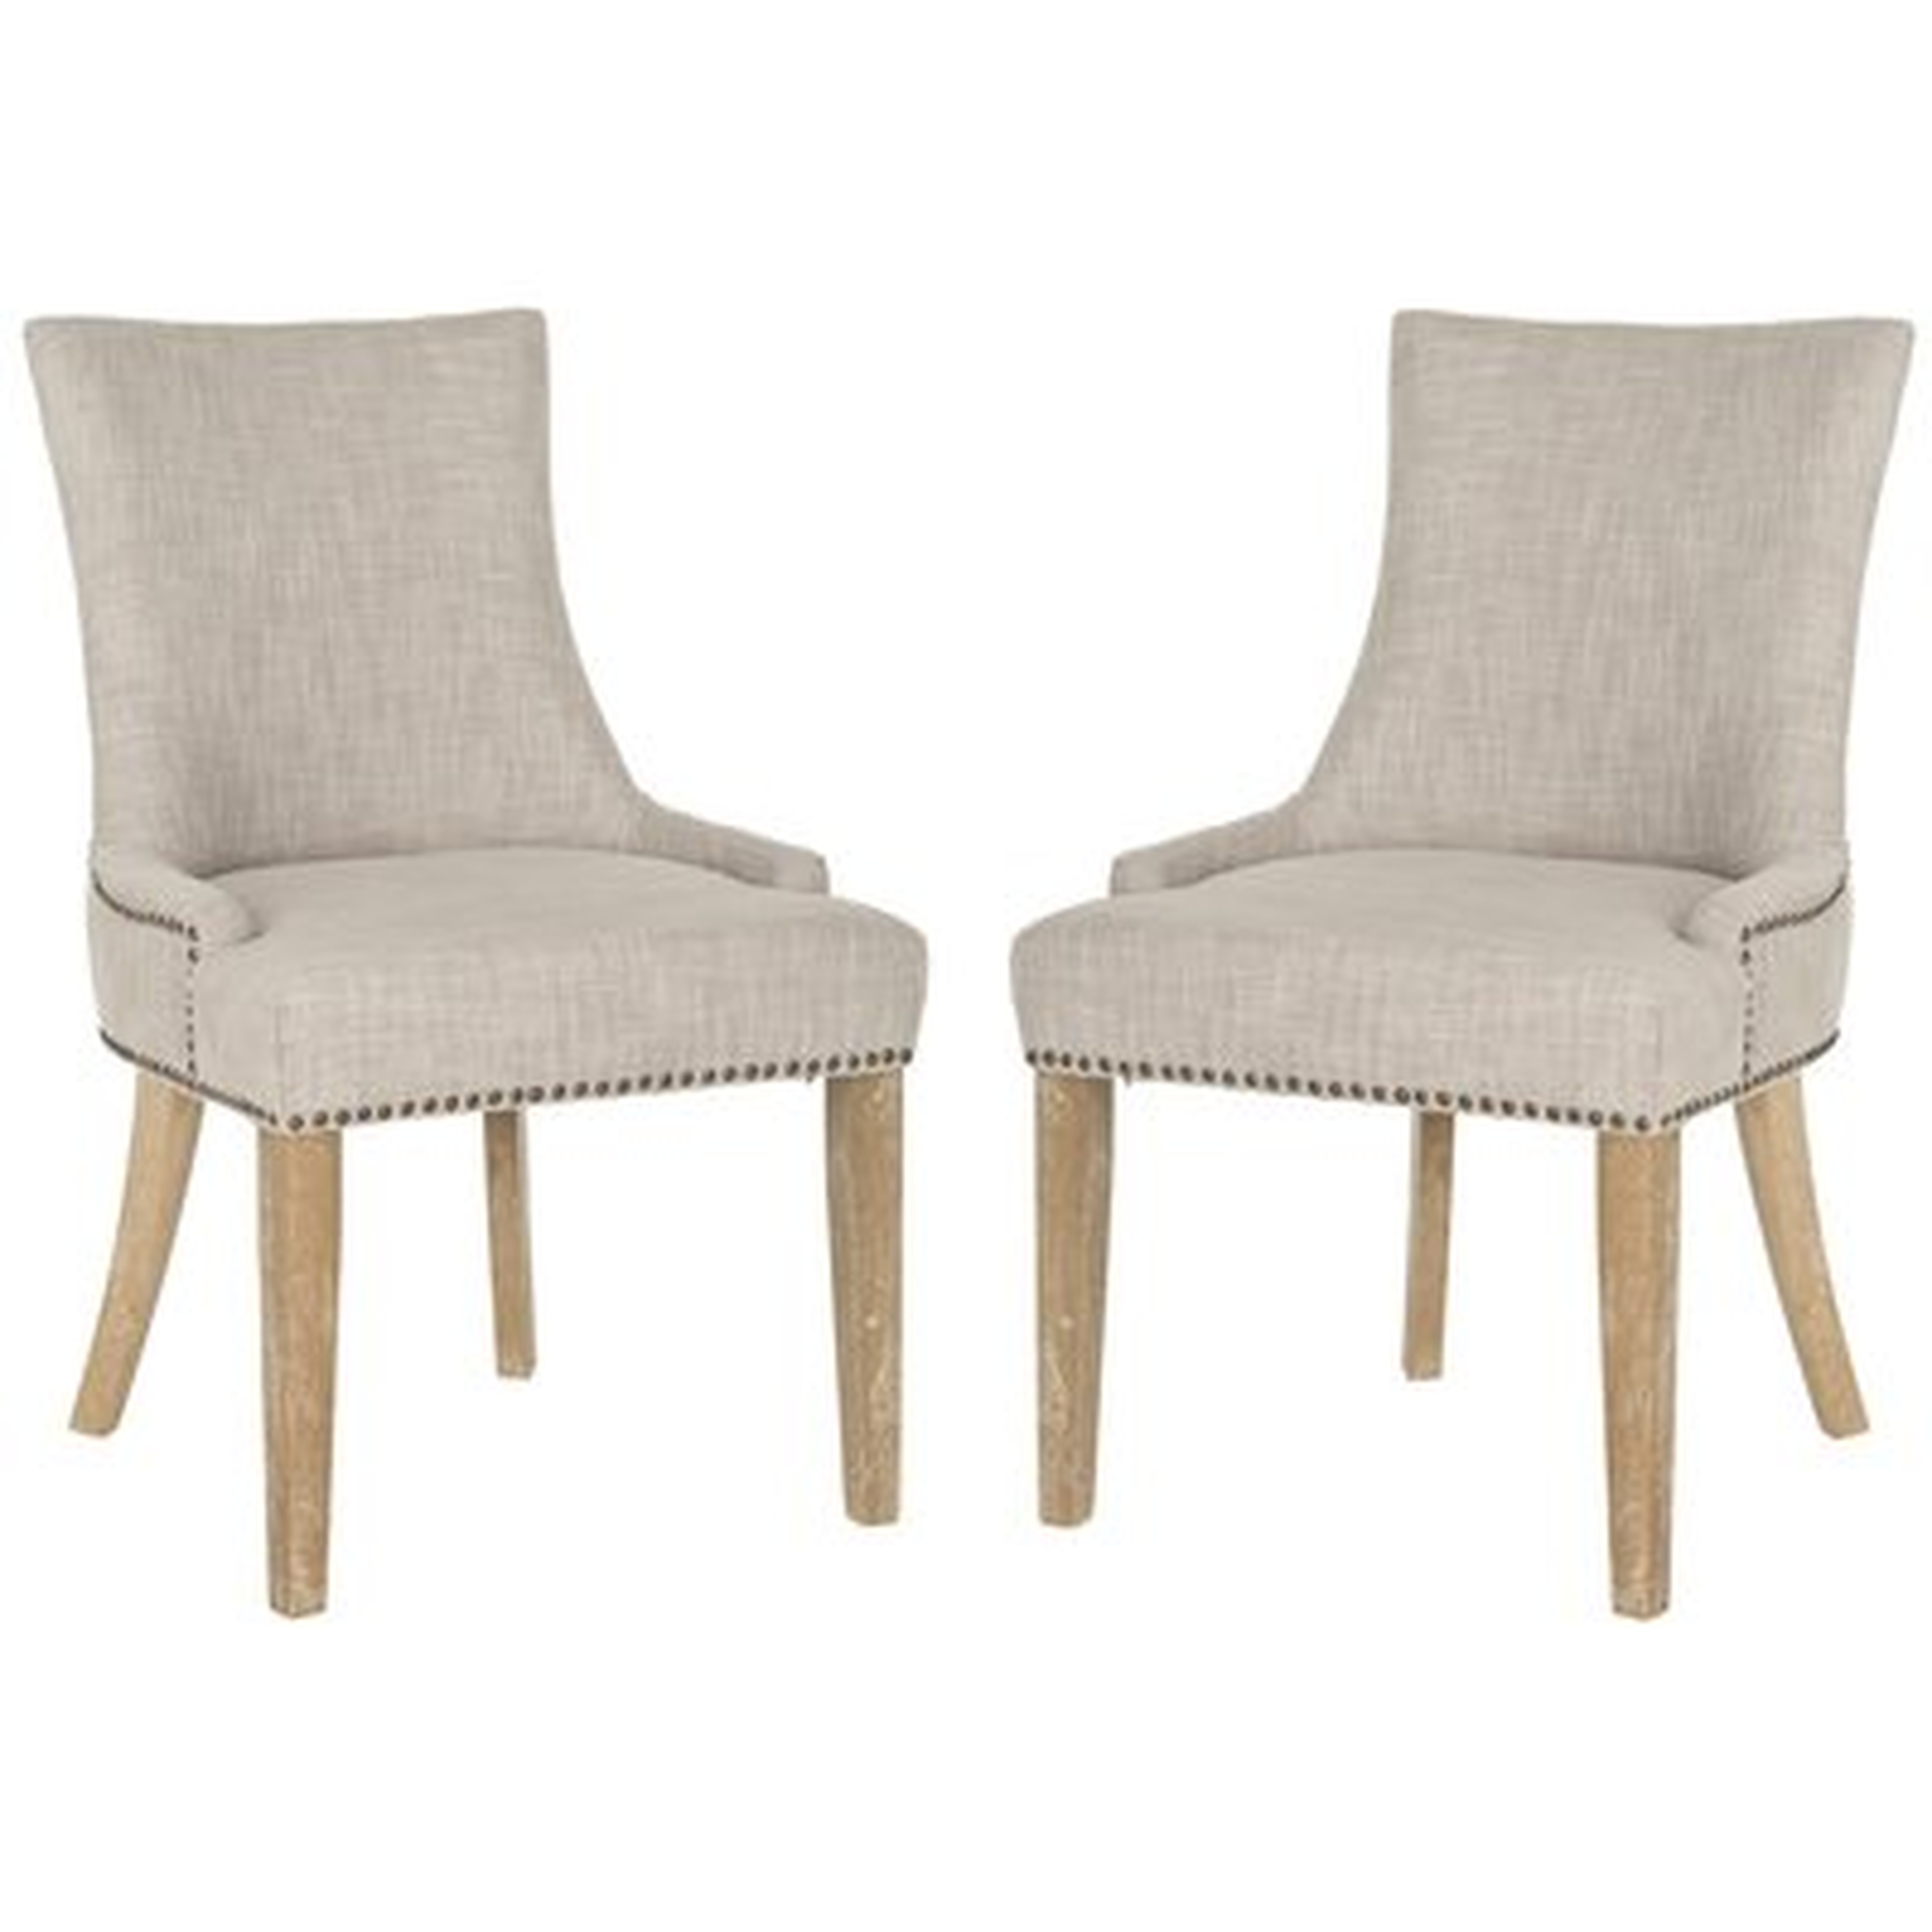 Abby Upholstered Side Chair / Set of 2 - Wayfair